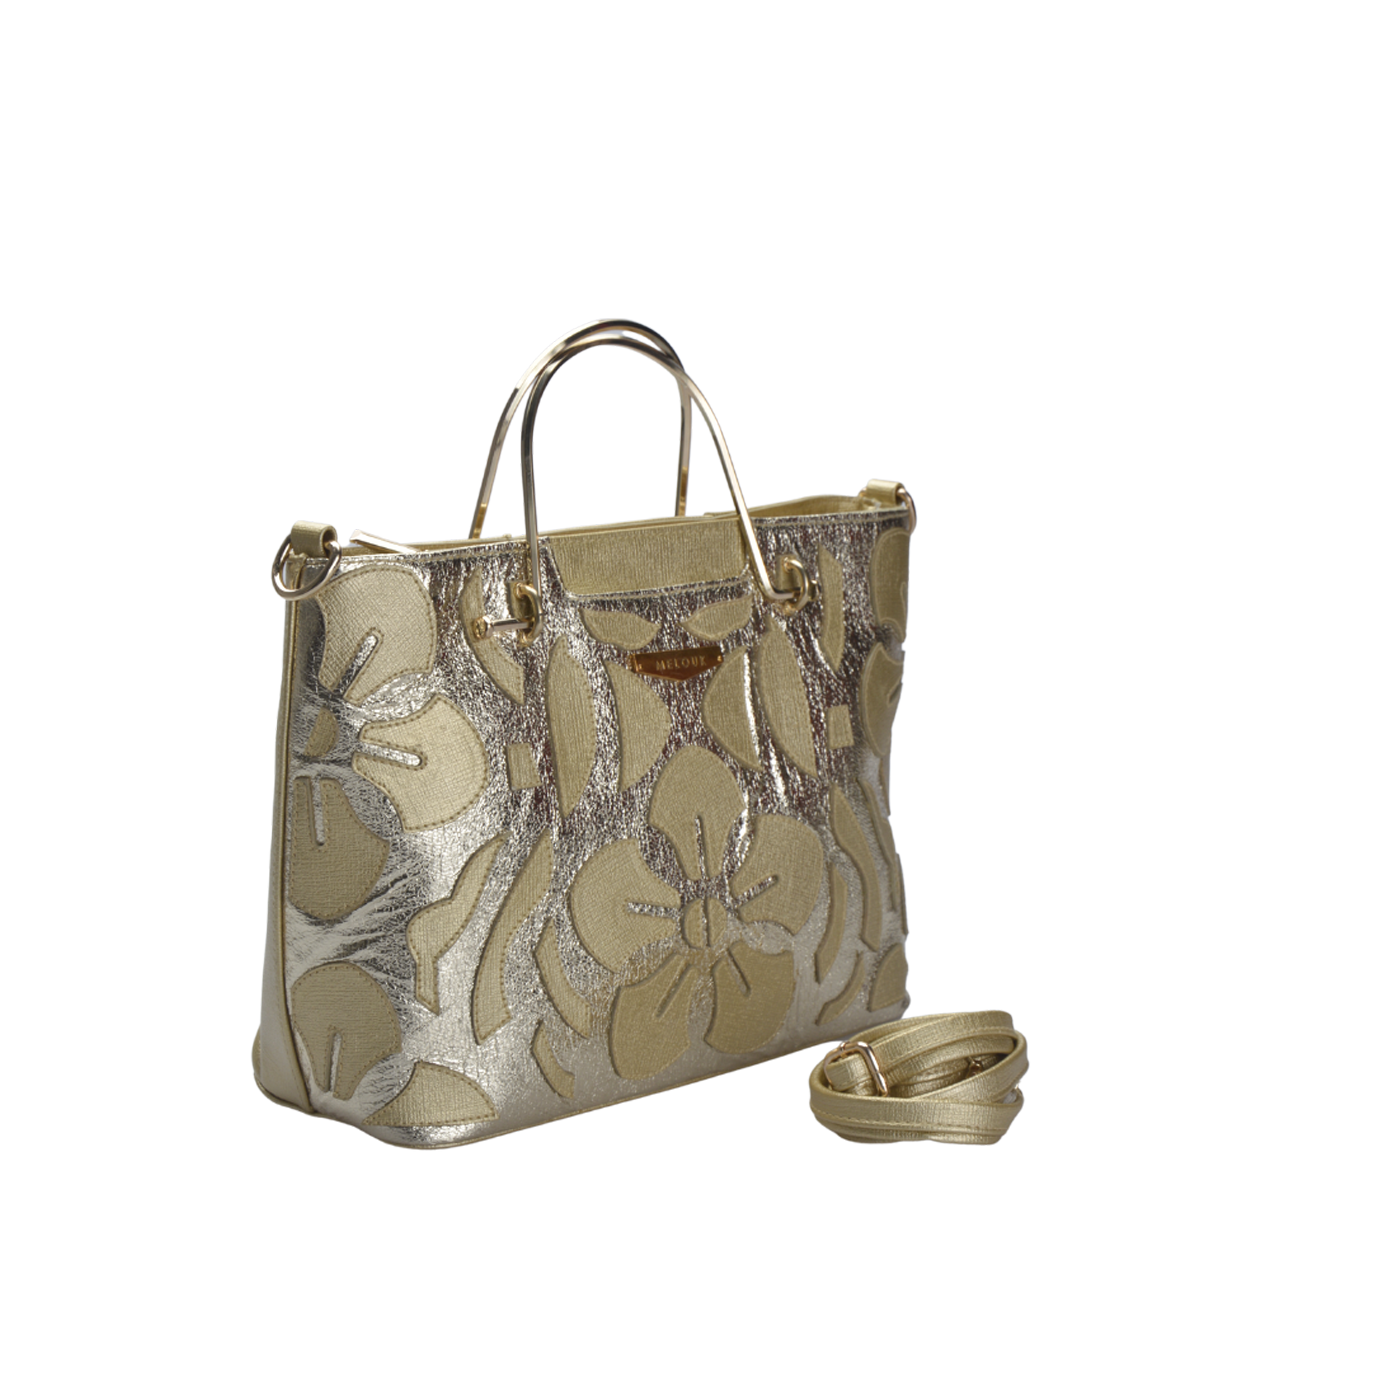 Gold Leather Hand Bag with Handle